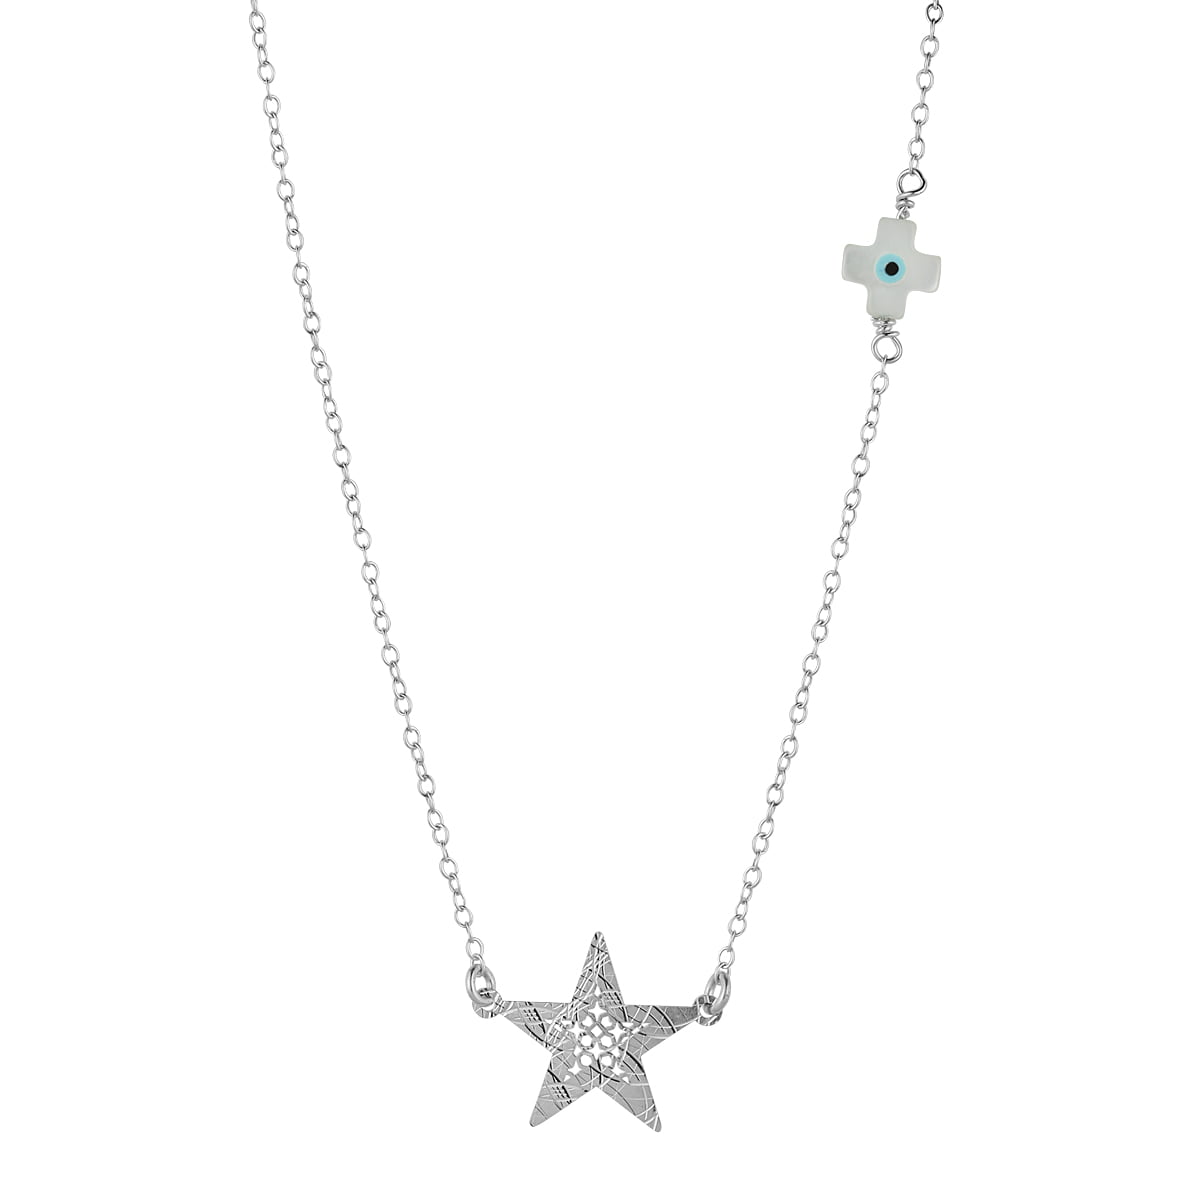 Handmade necklace made of silver 925 with star and peephole